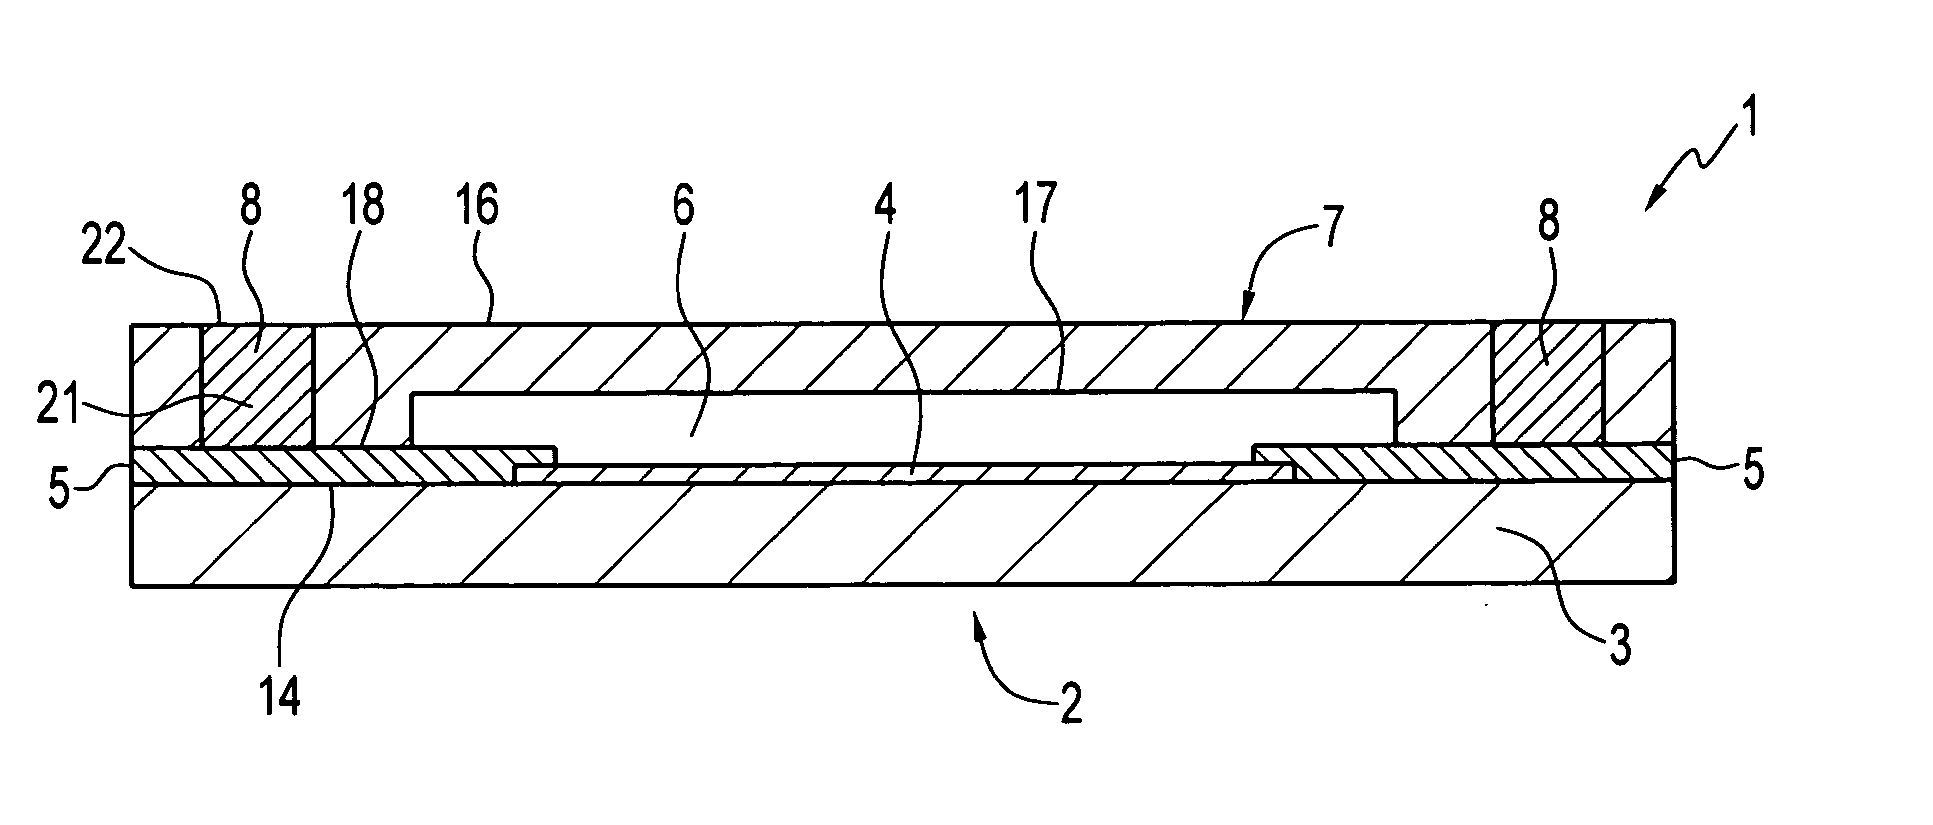 Surface acoustic wave packages and methods of forming same